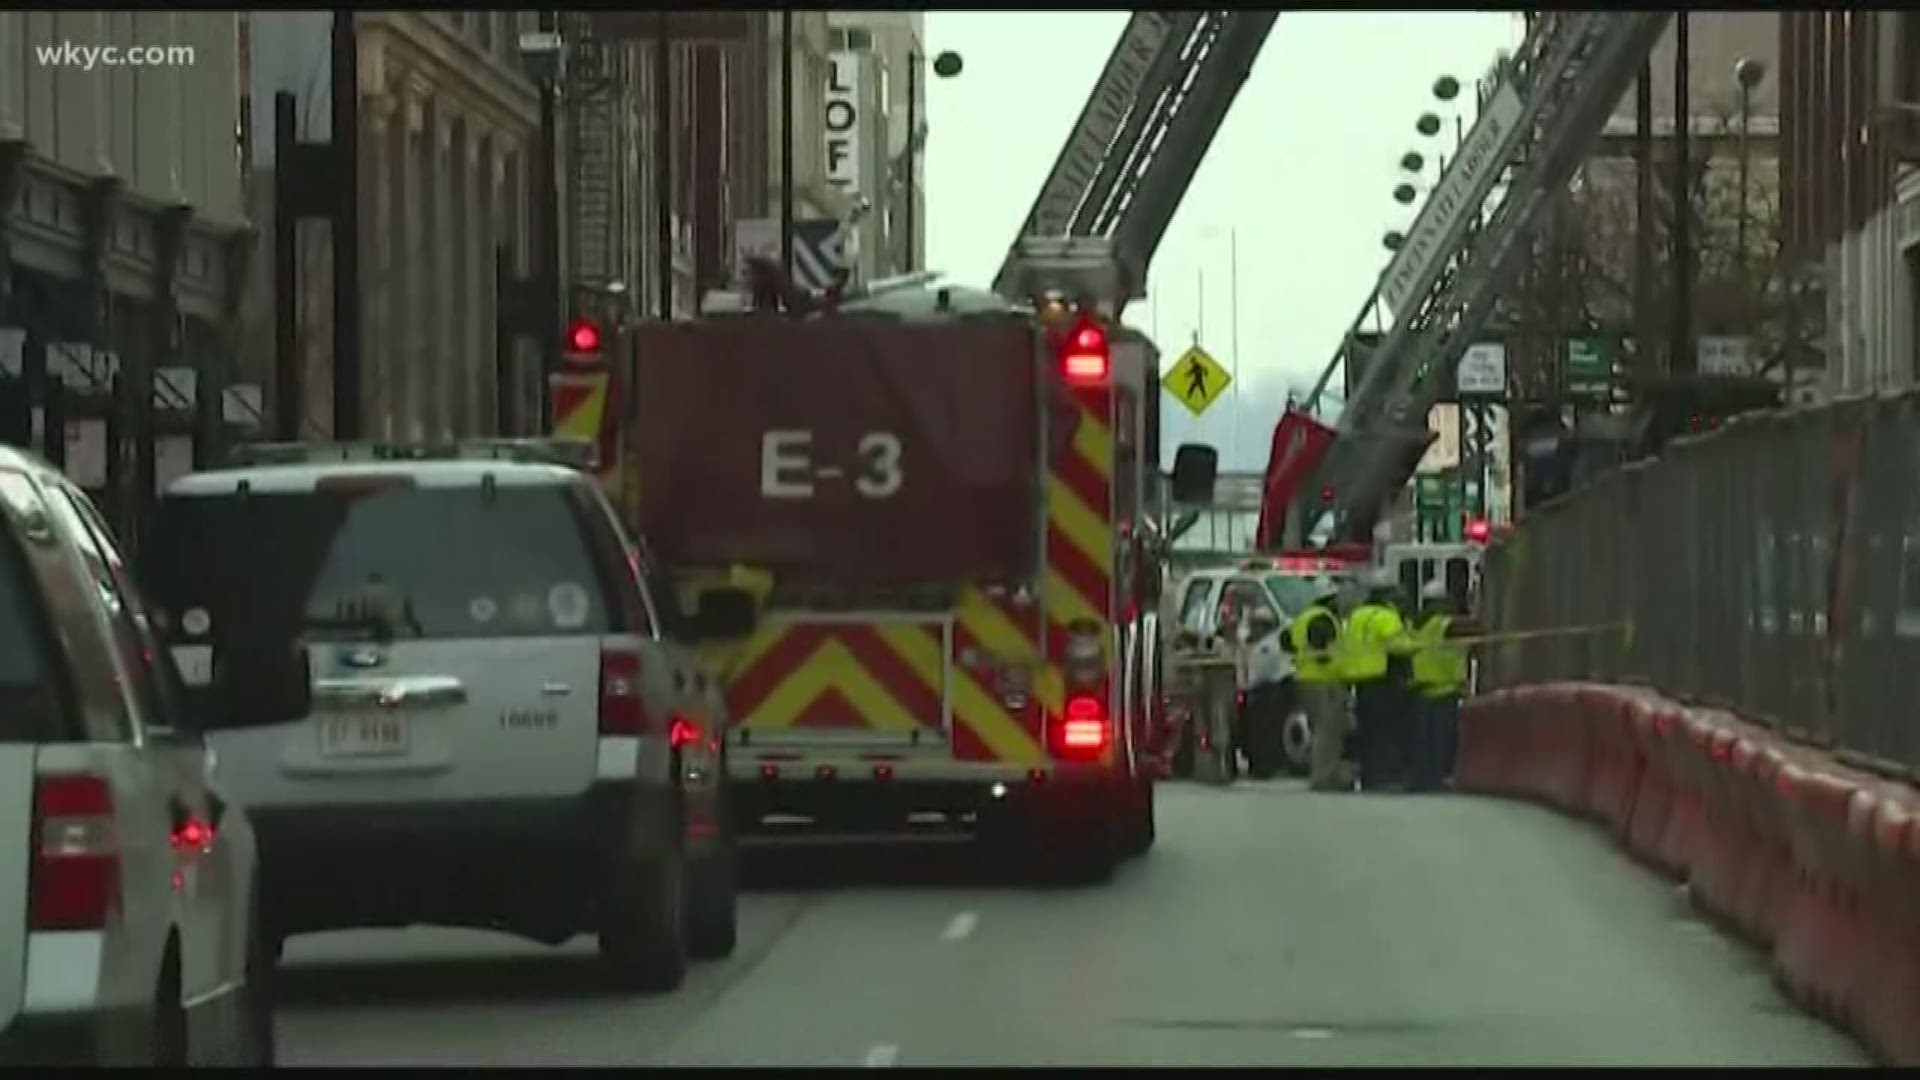 Authorities say at least three people have been injured in Cincinnati after part of a building under construction collapsed. This is a developing story.